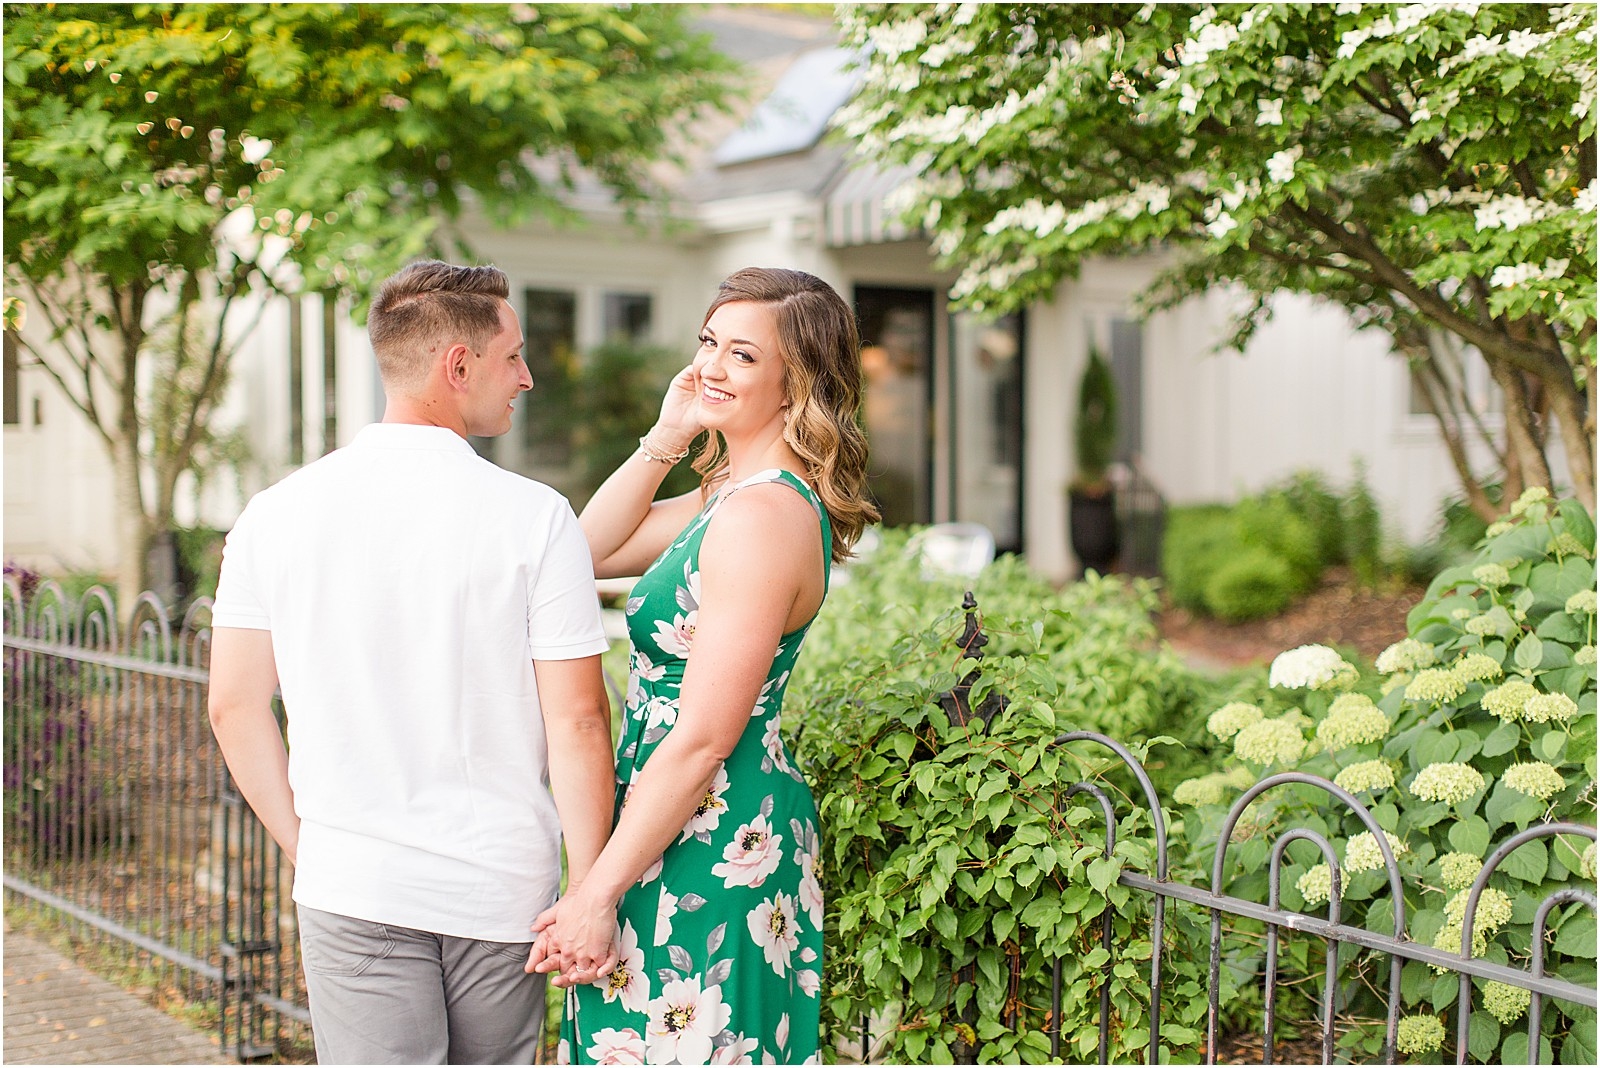 20 West Downtown Newburgh Anniversary Session | Katie and Bobby | Bret and Brandie Photography 019.jpg